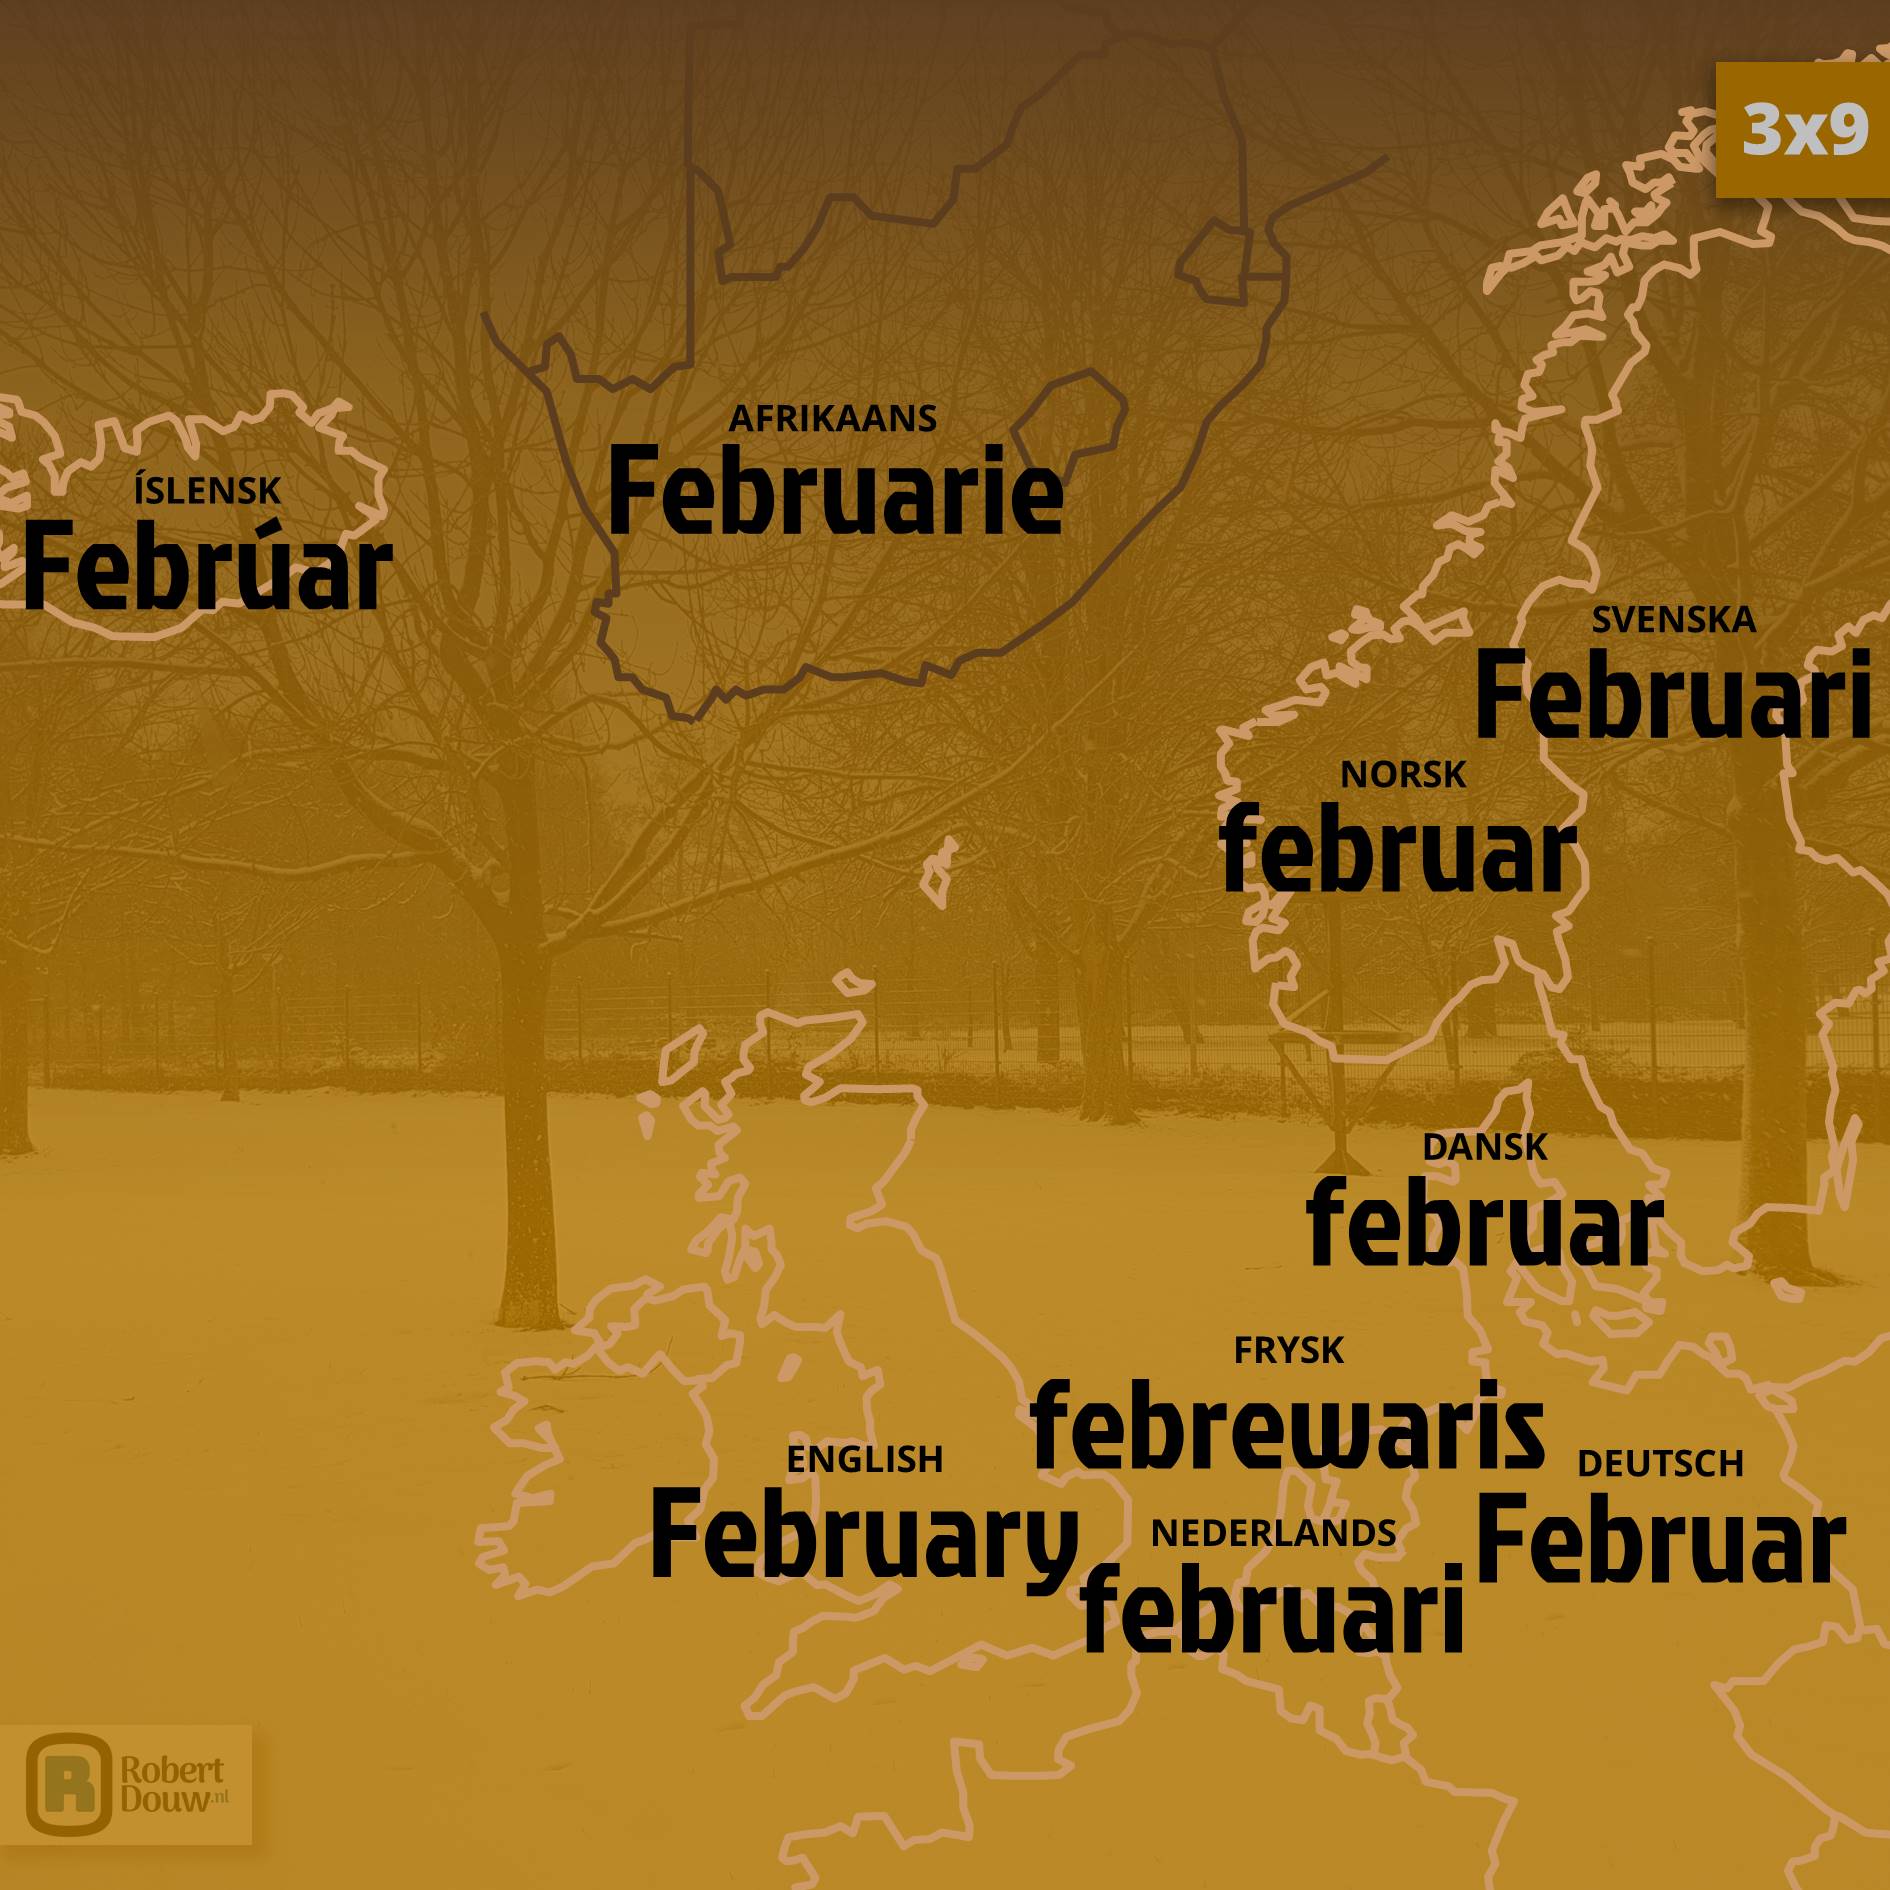 'February' in nine languages.